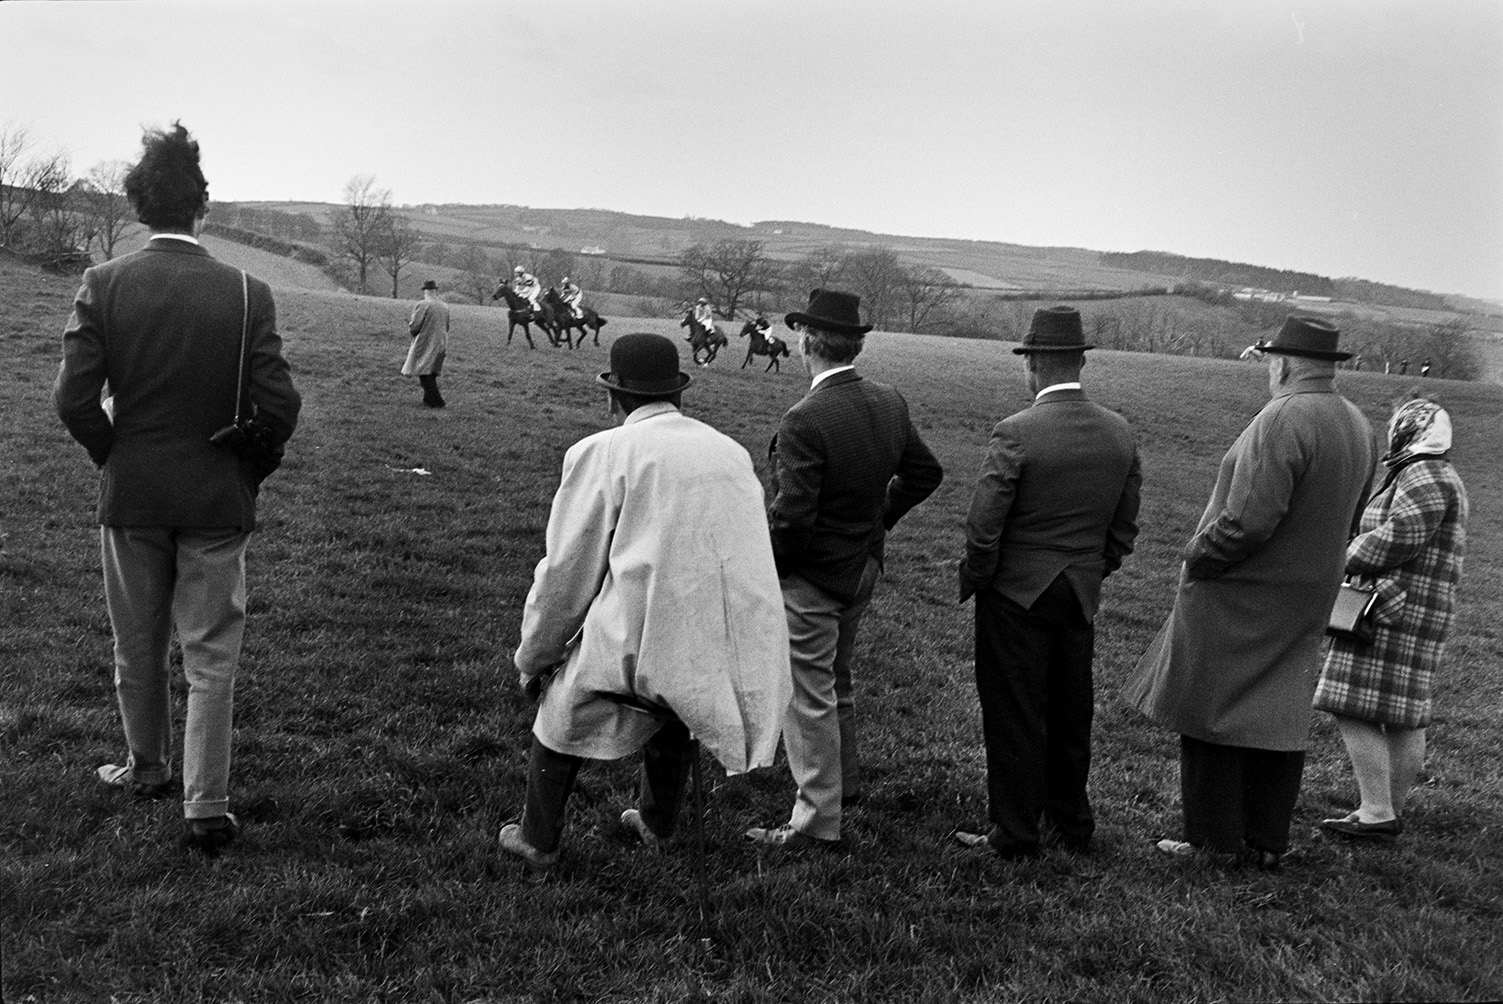 Spectators watching the Torrington Farmers Hunt Point to Point at Chapelton. The horses and riders can be seen competing in the field.